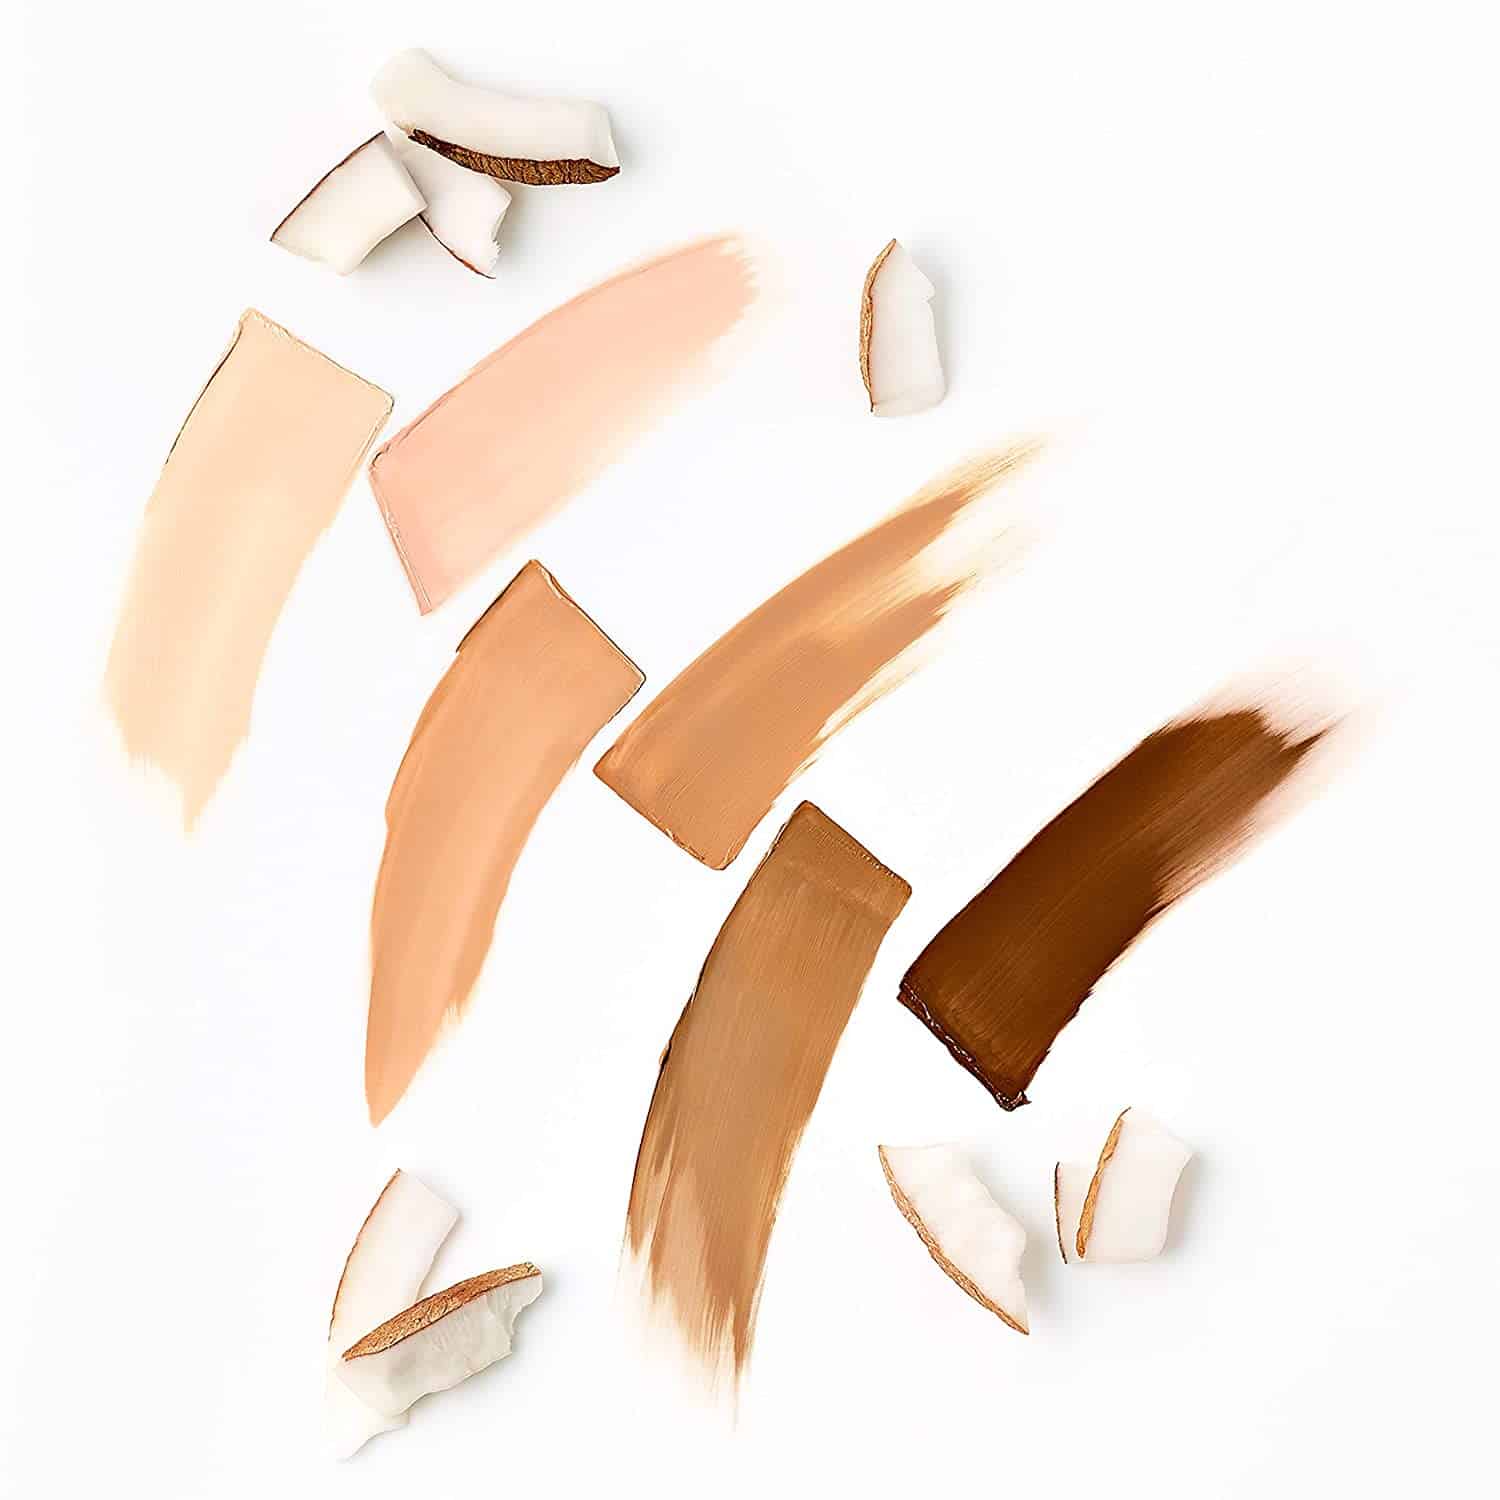 Undone Beauty Conceal to Reveal 3-in-1 Concealer swatches